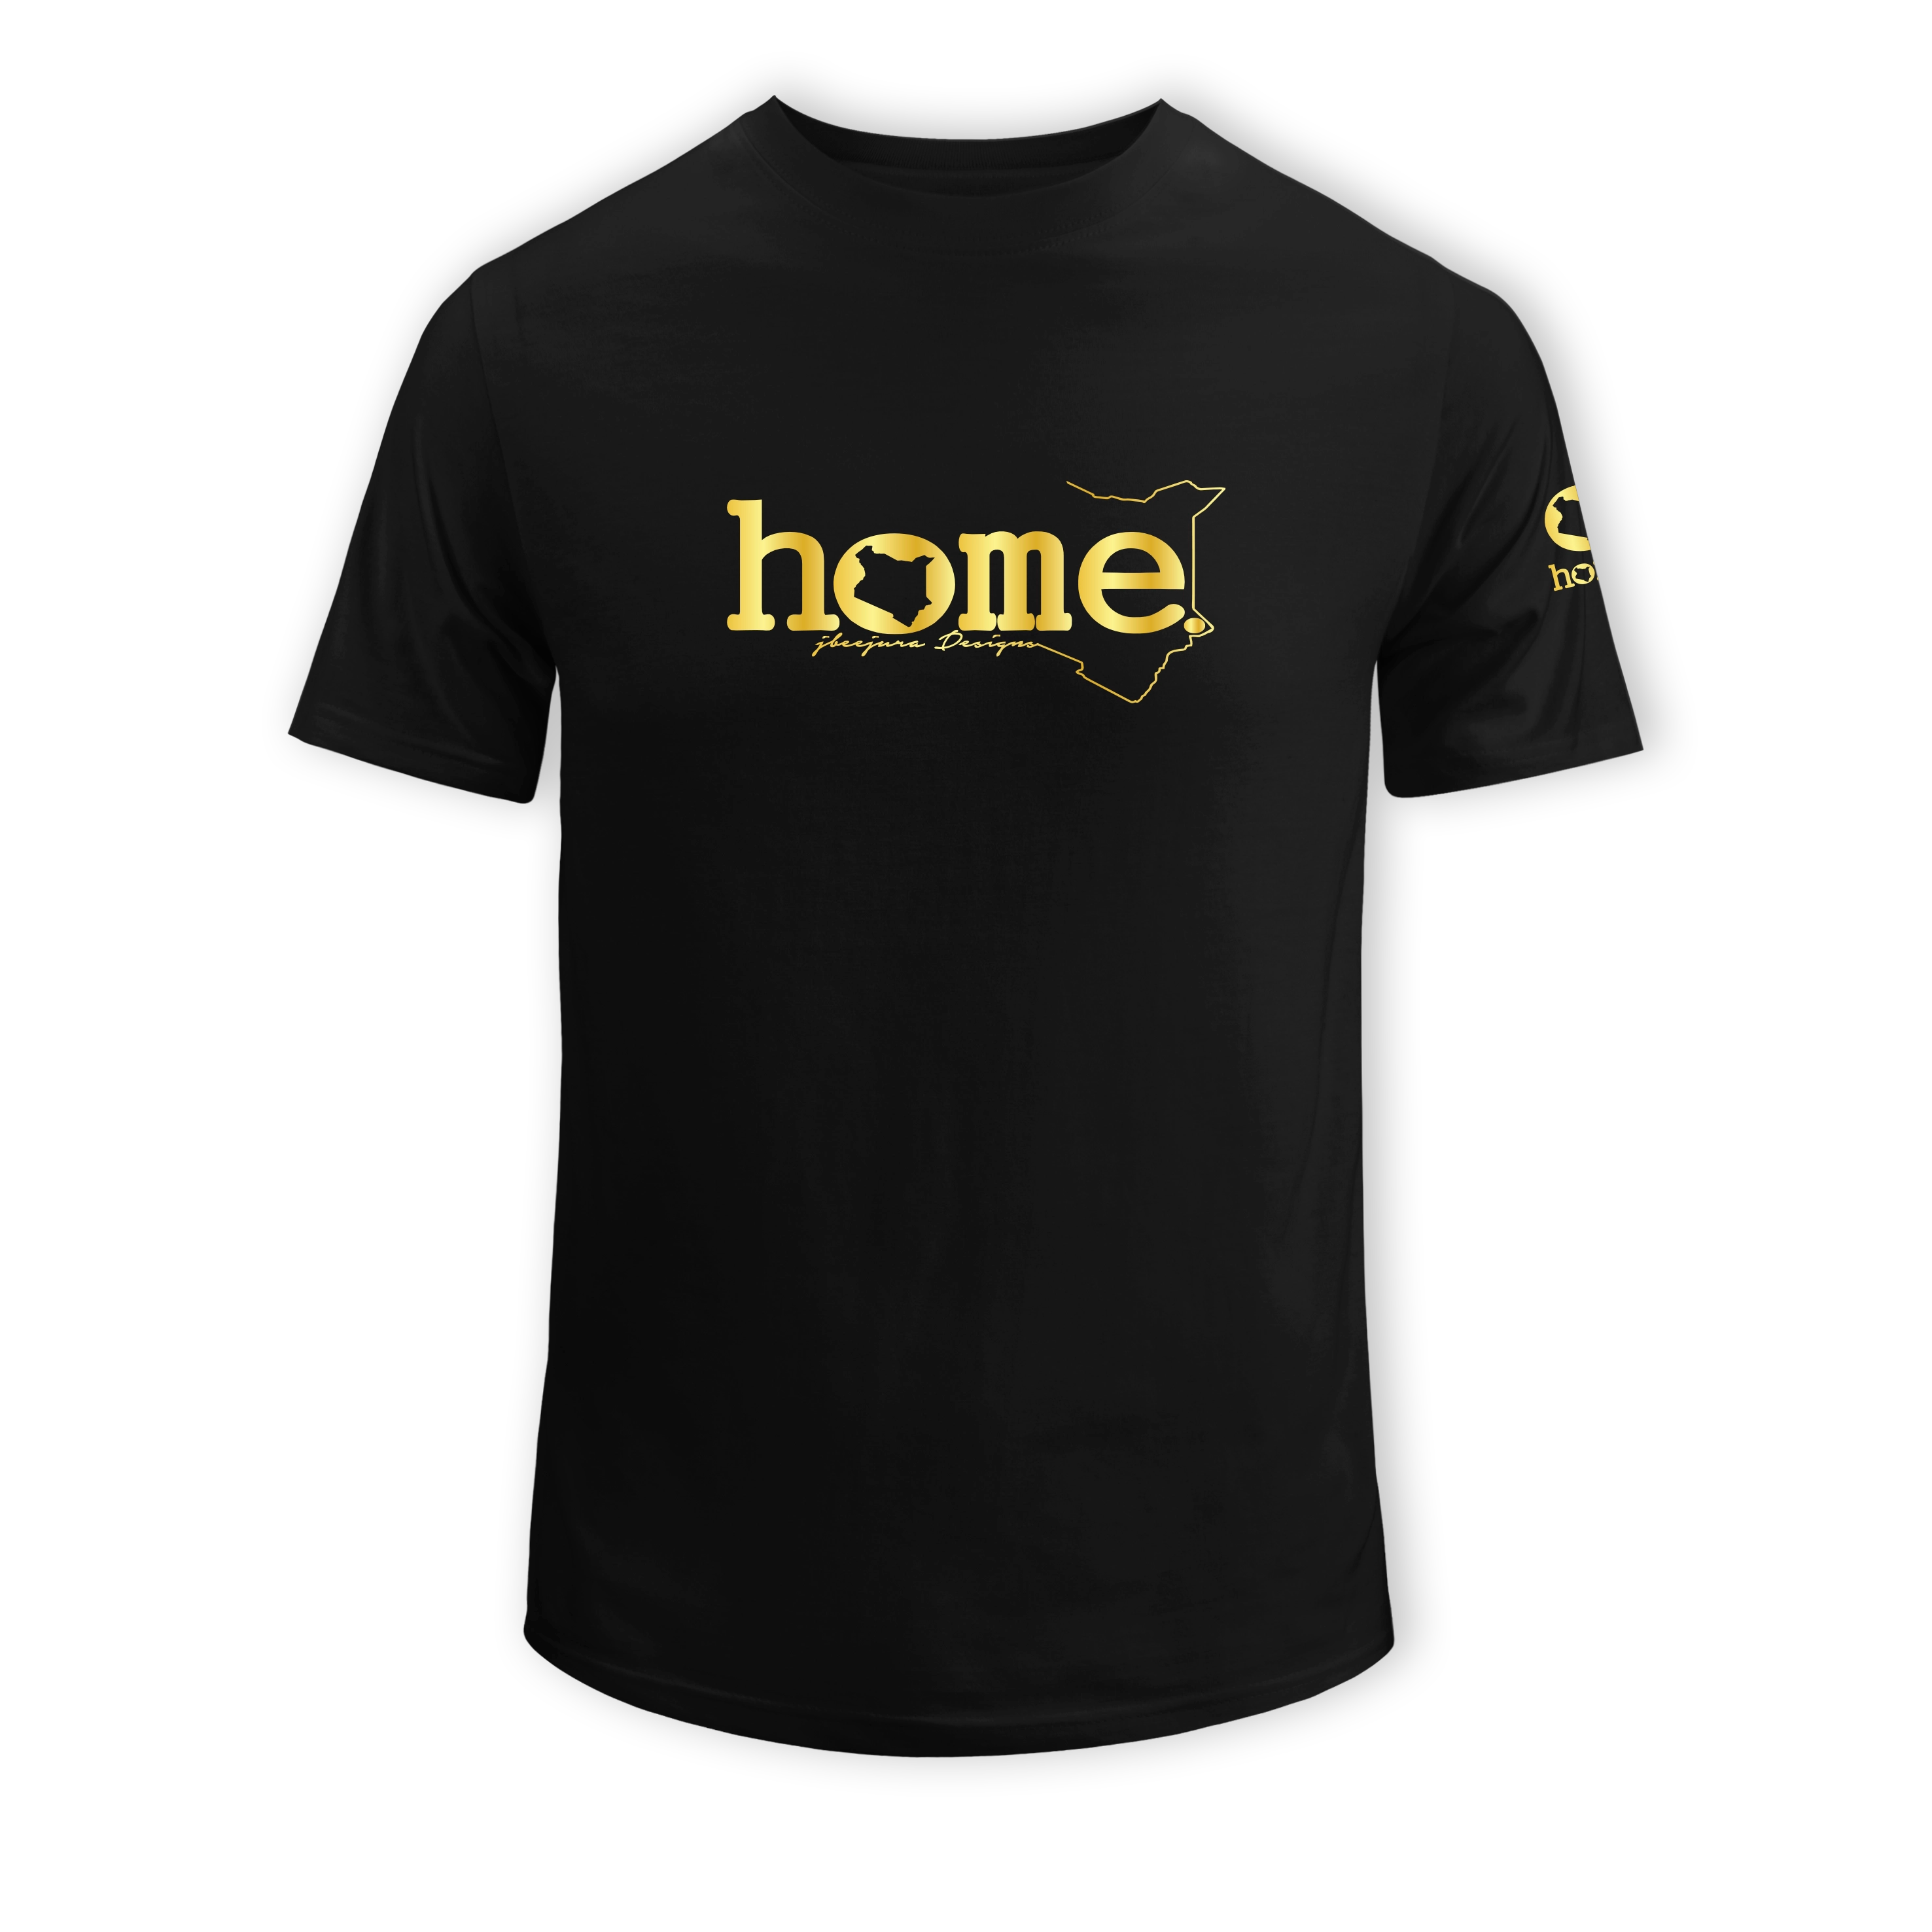 home_254 SHORT-SLEEVED BLACK T-SHIRT WITH A GOLD CLASSIC WORDS PRINT – COTTON PLUS FABRIC